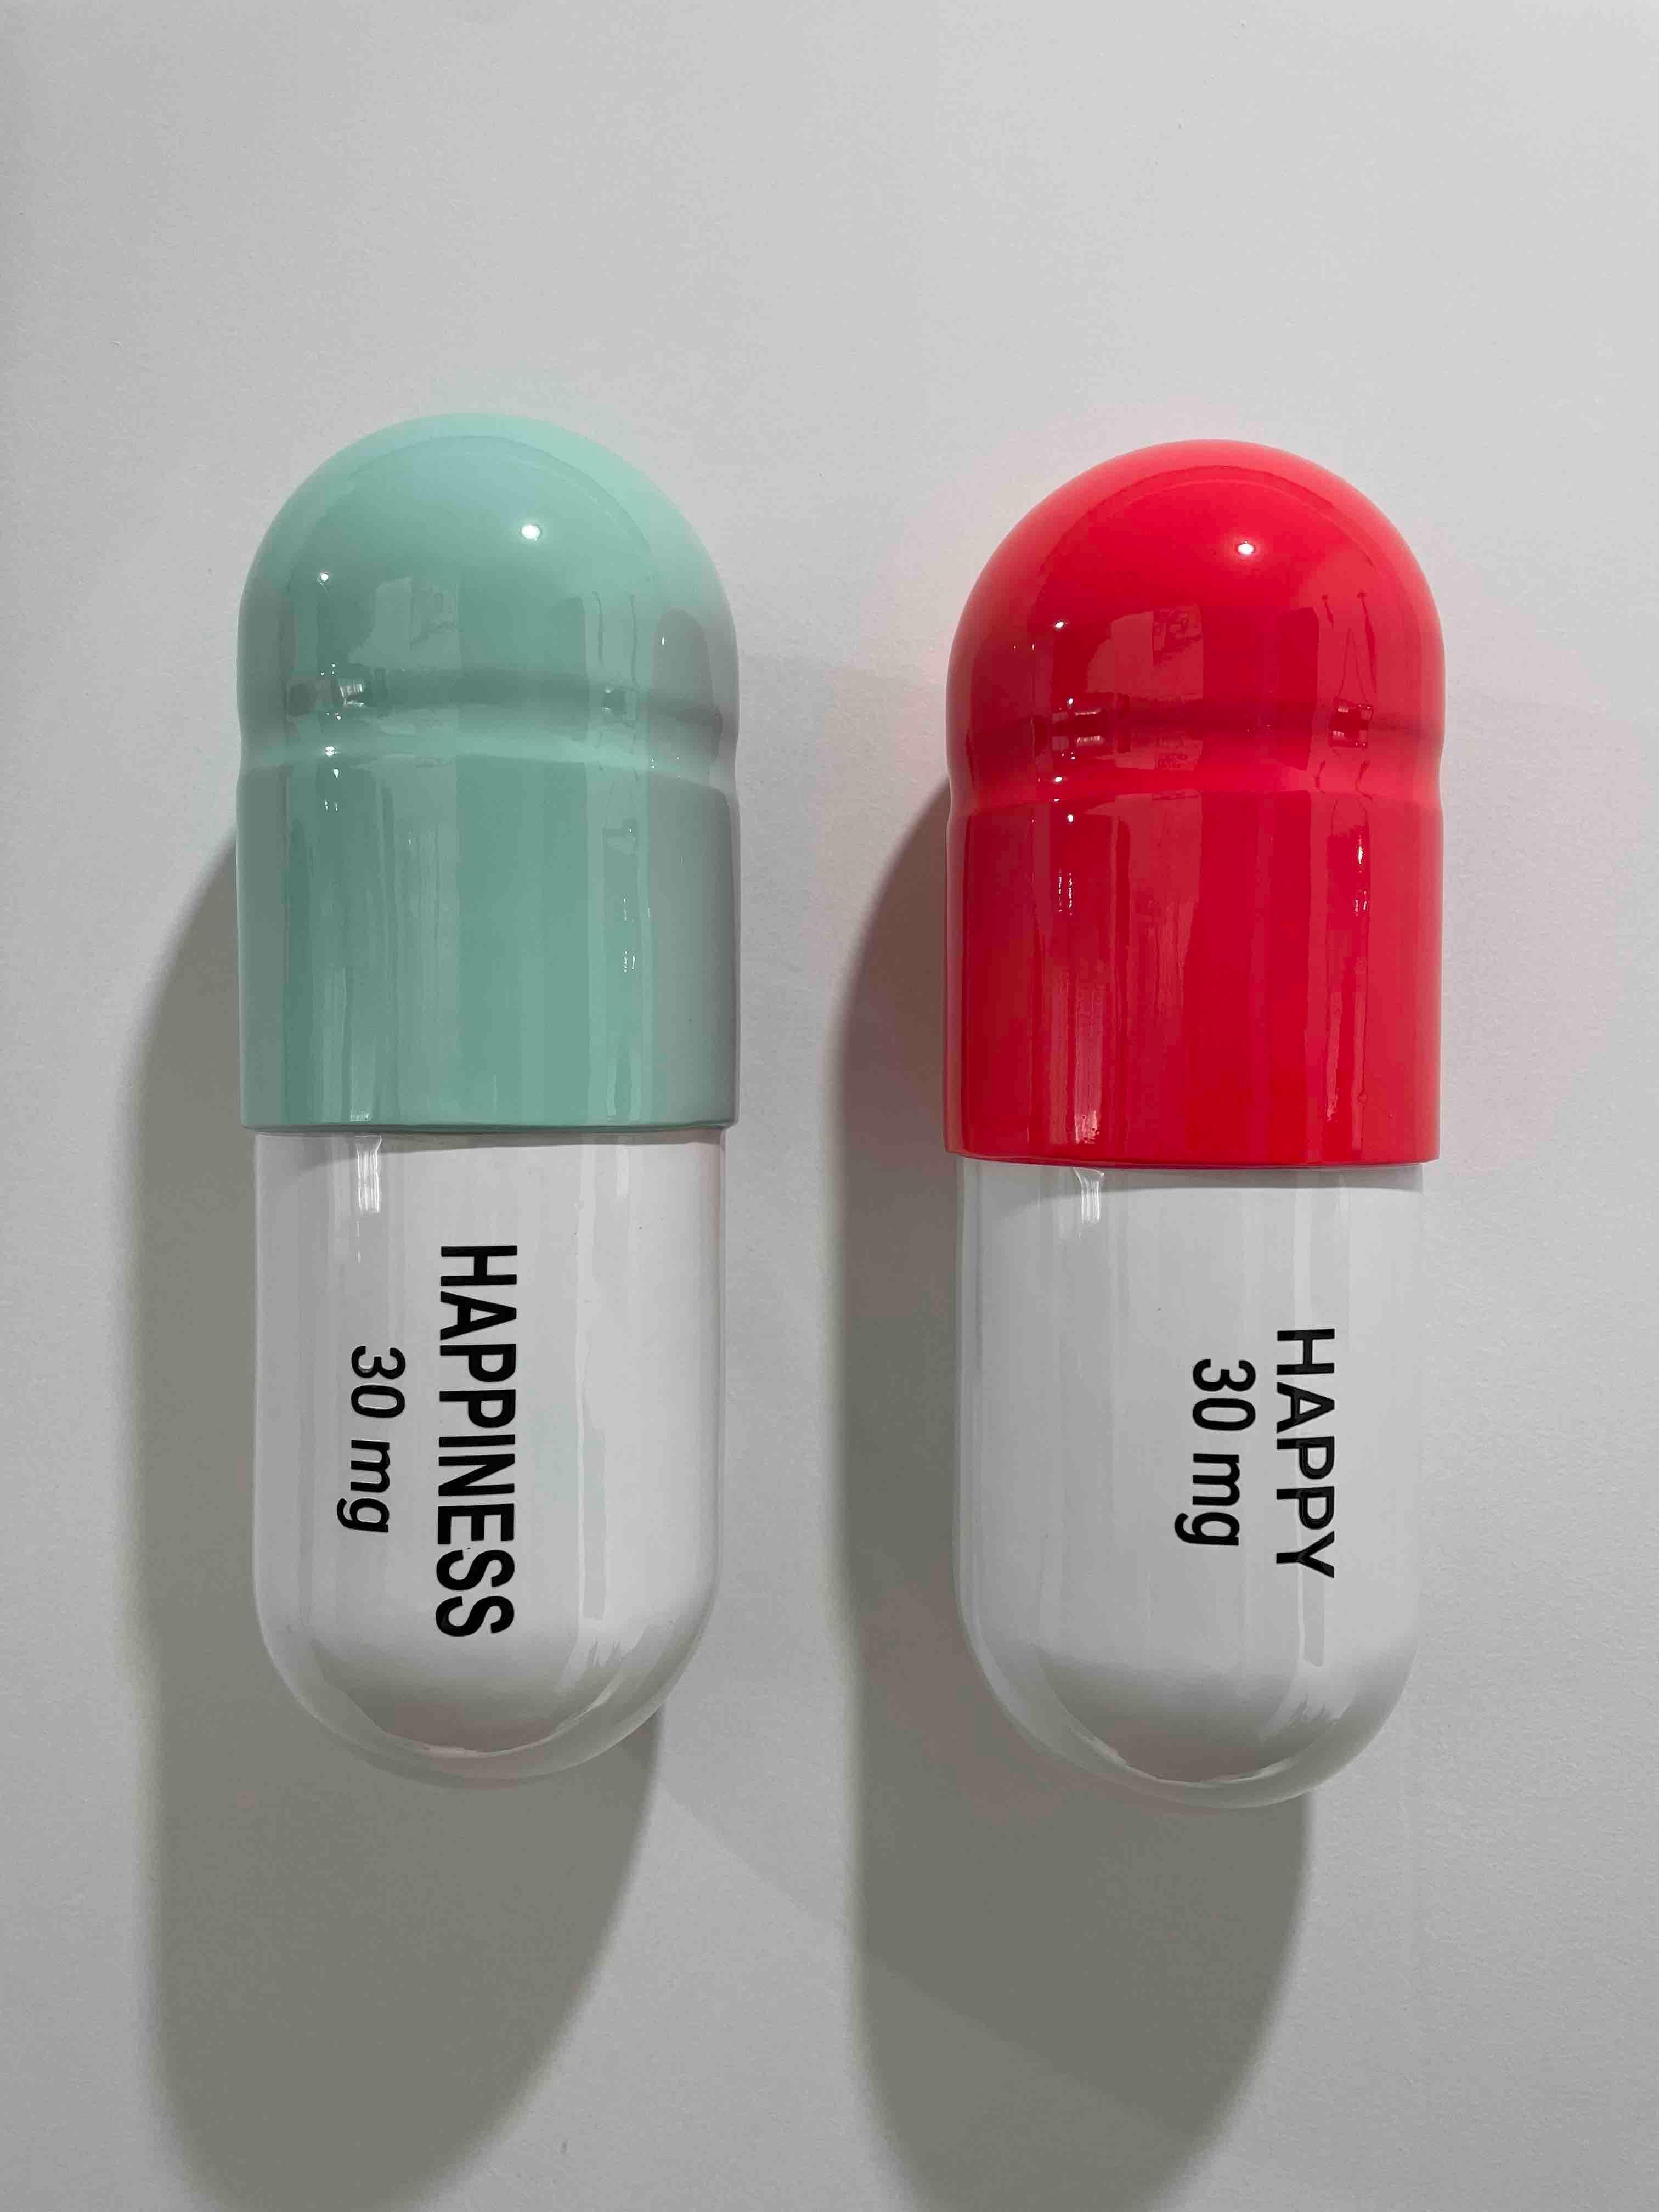 Tal Nehoray Figurative Sculpture - 30 MG Happiness Happy pill Combo (mint green, pink) - figurative sculpture